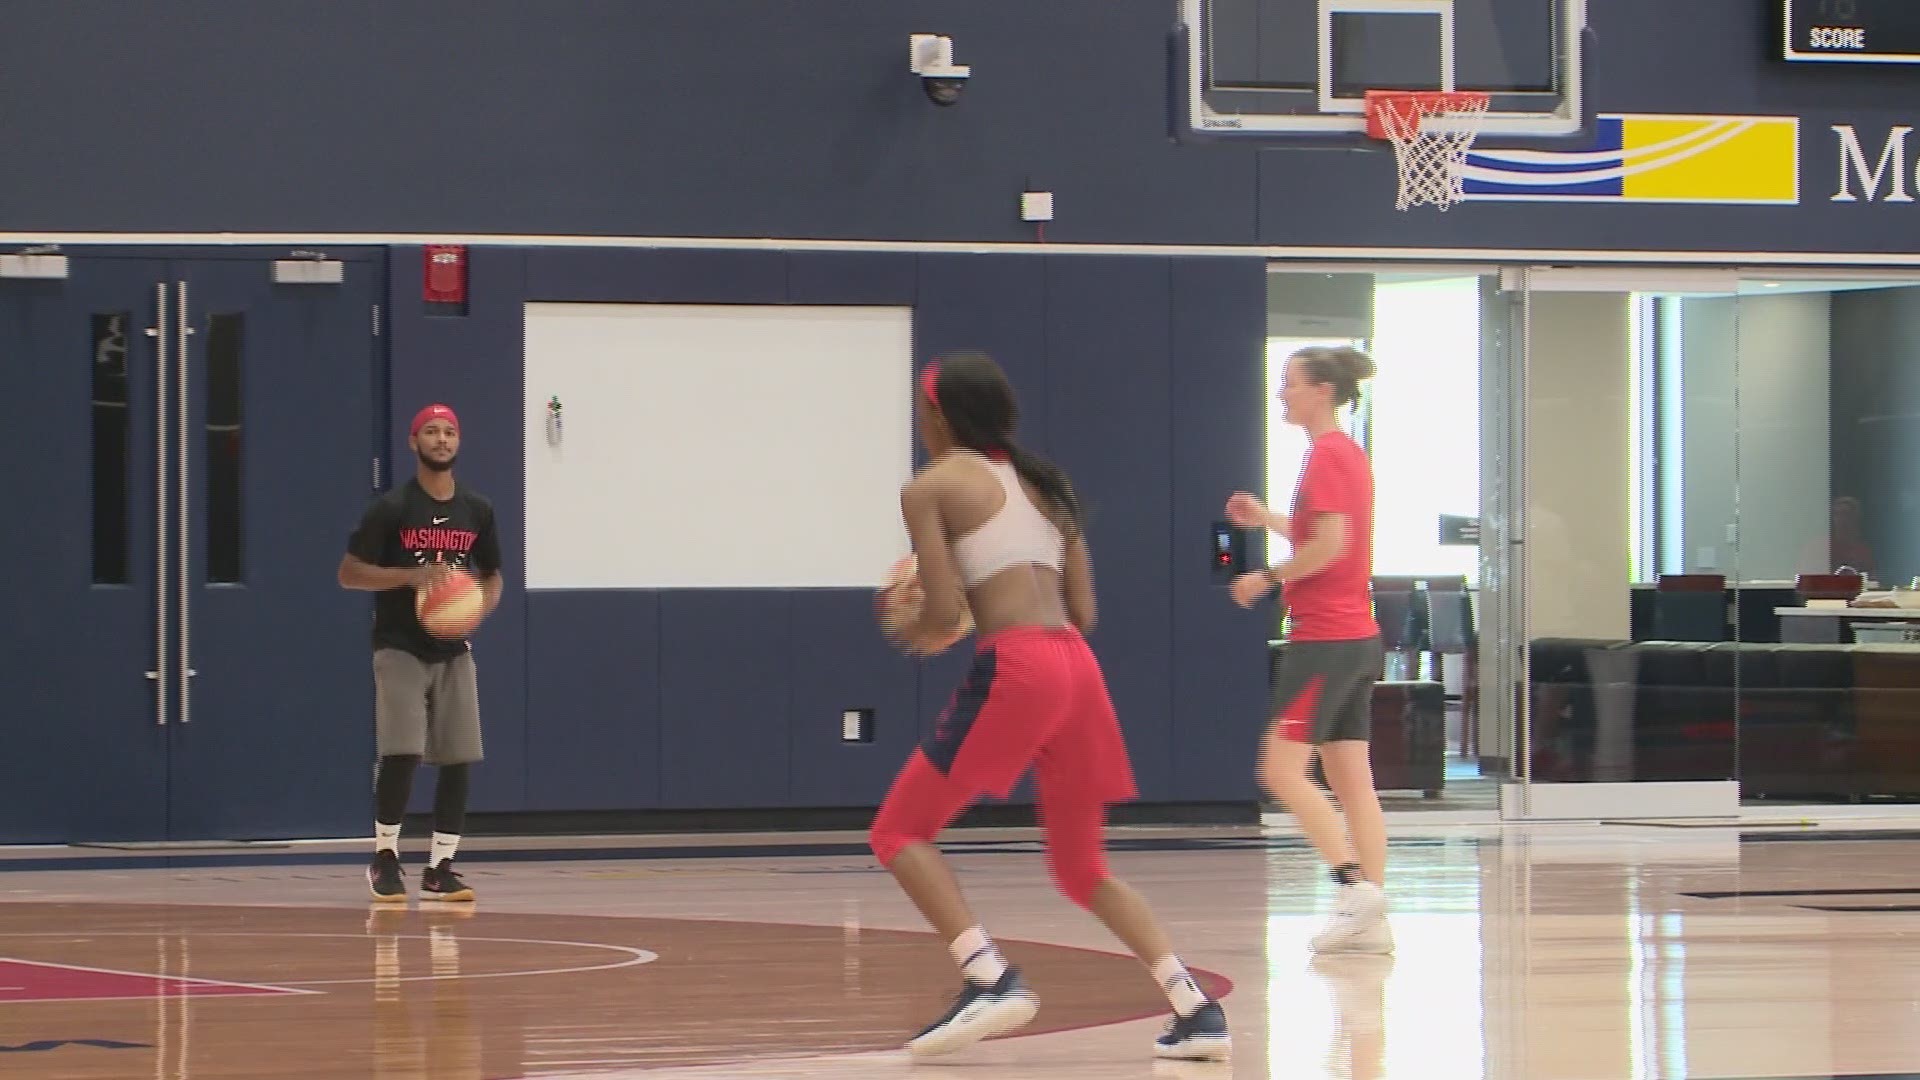 The WNBA Finals are underway and tonight the Washington Mystics are taking on Las Vegas in the semifinals. It's game 1 of a best of five series. Our Mike WIse caught up with the team before they hit the court.